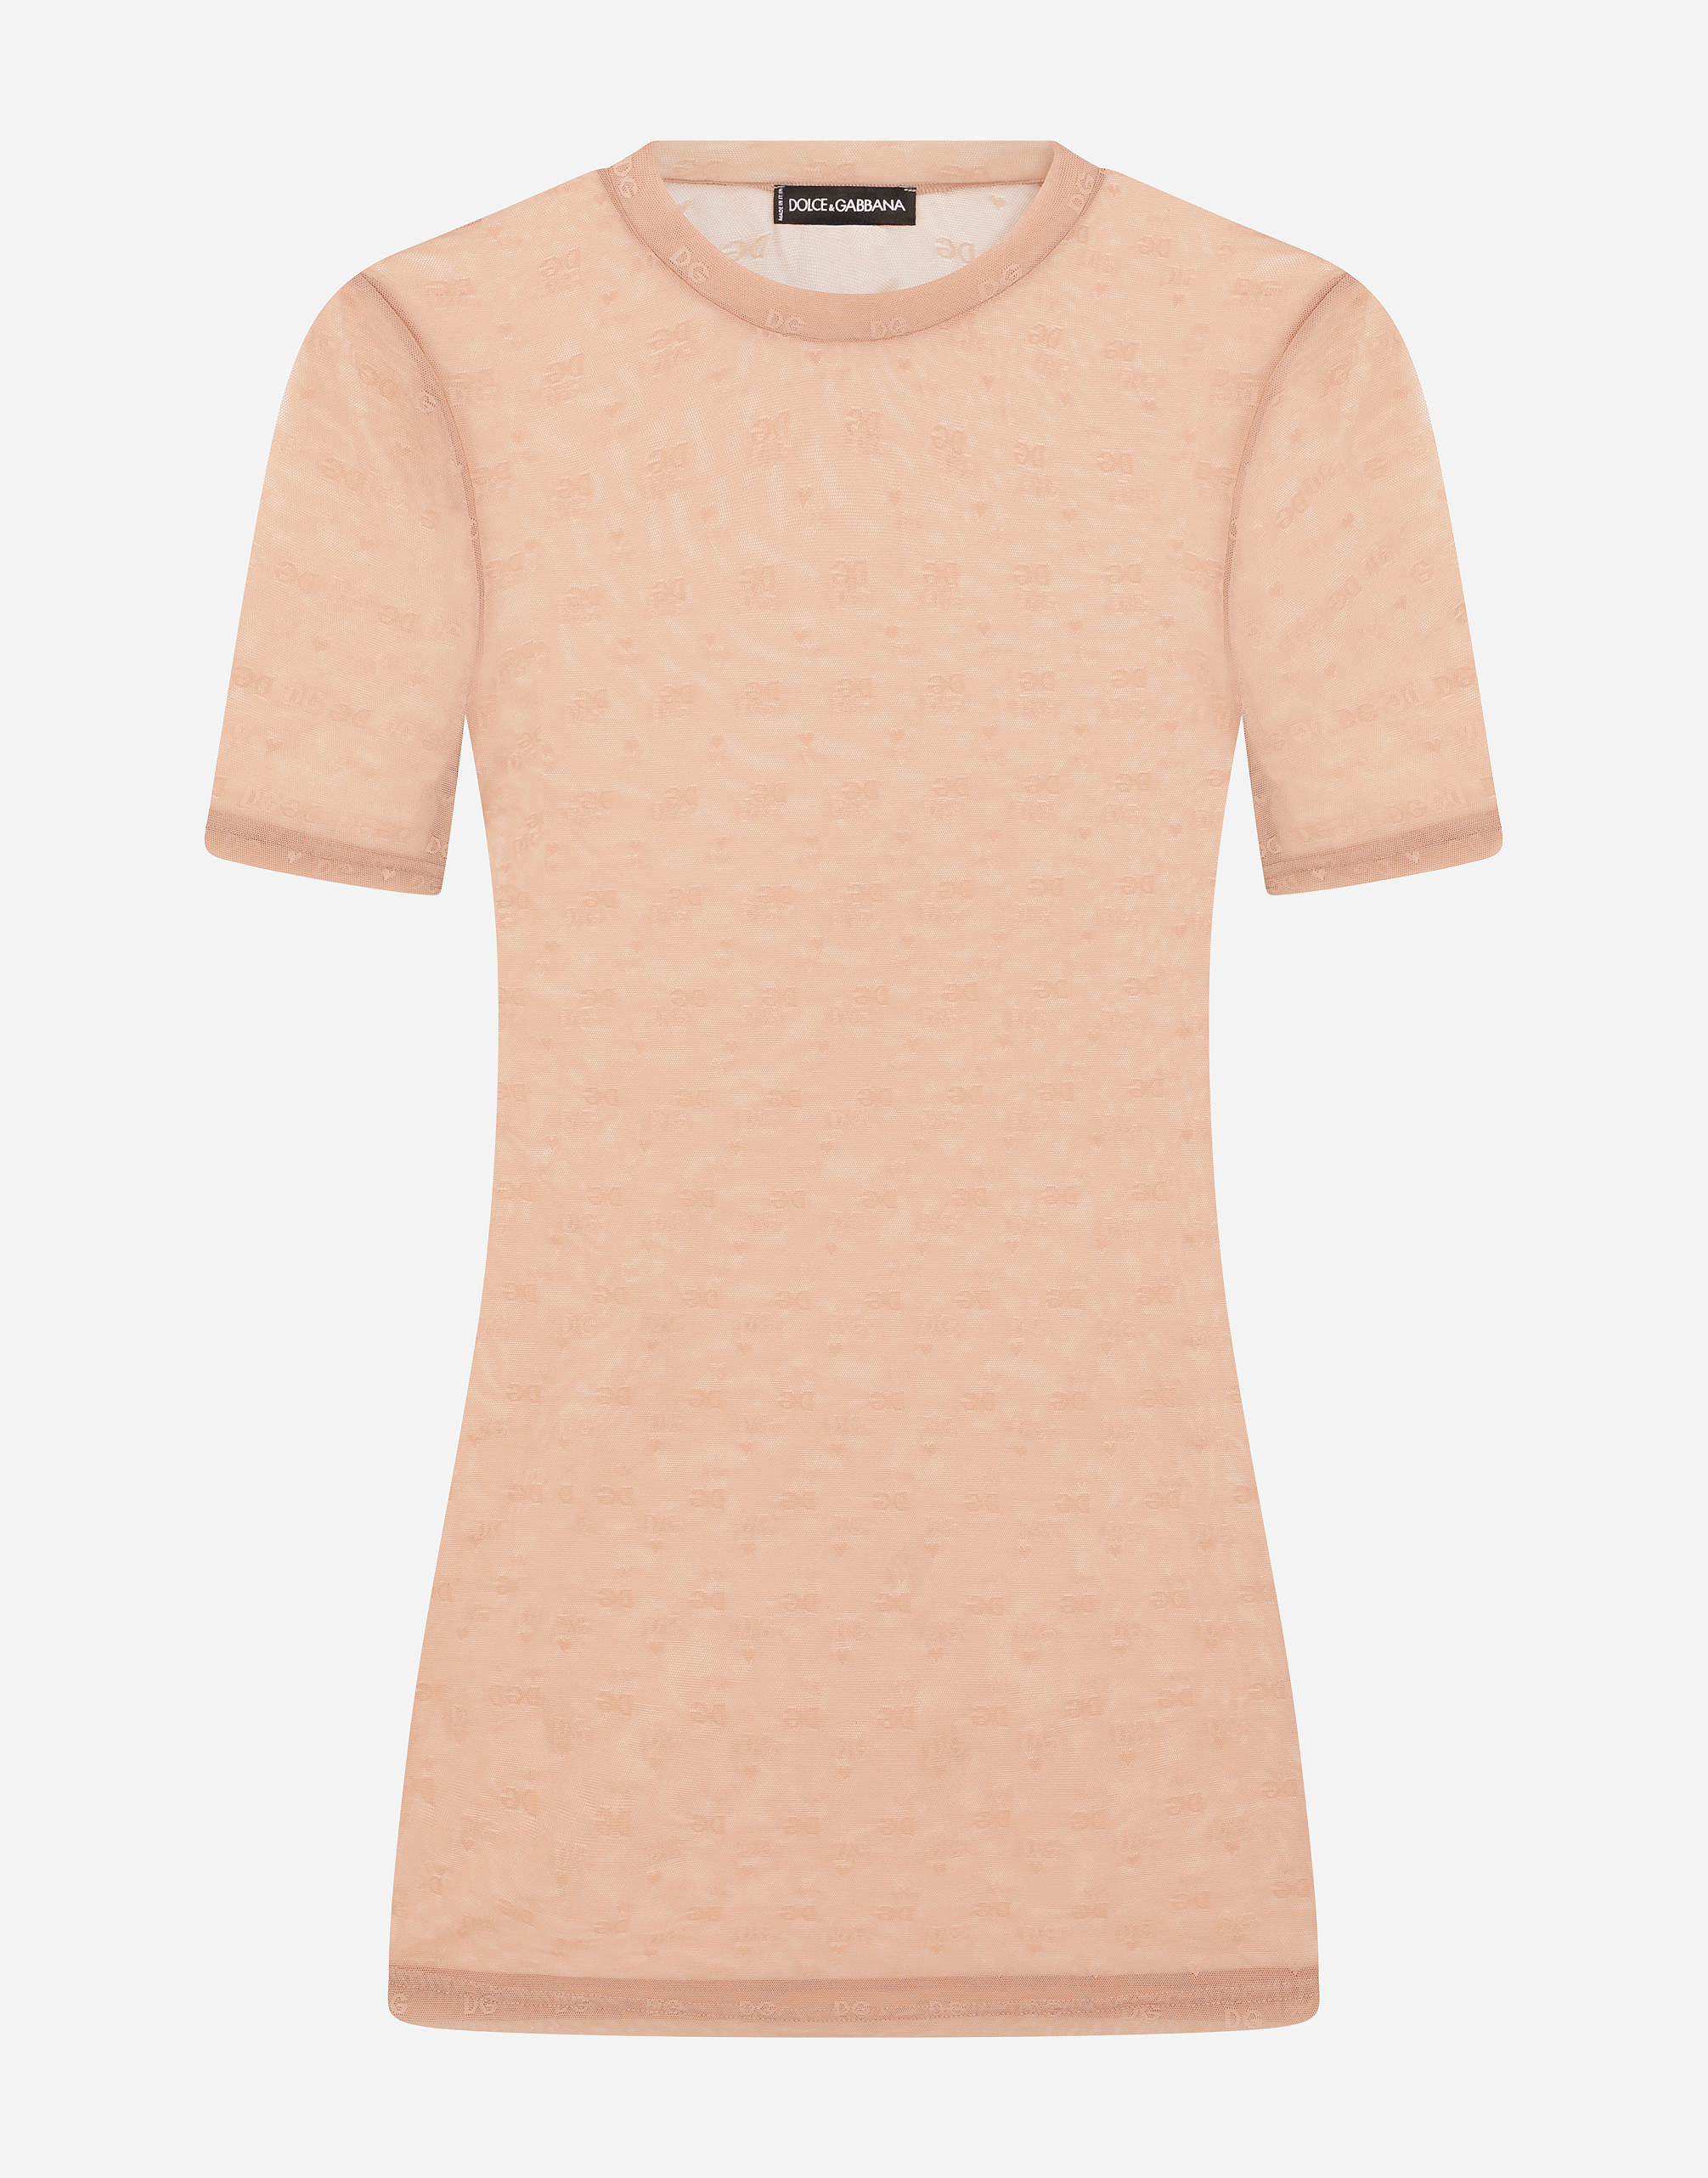 Jacquard tulle T-shirt in Beige